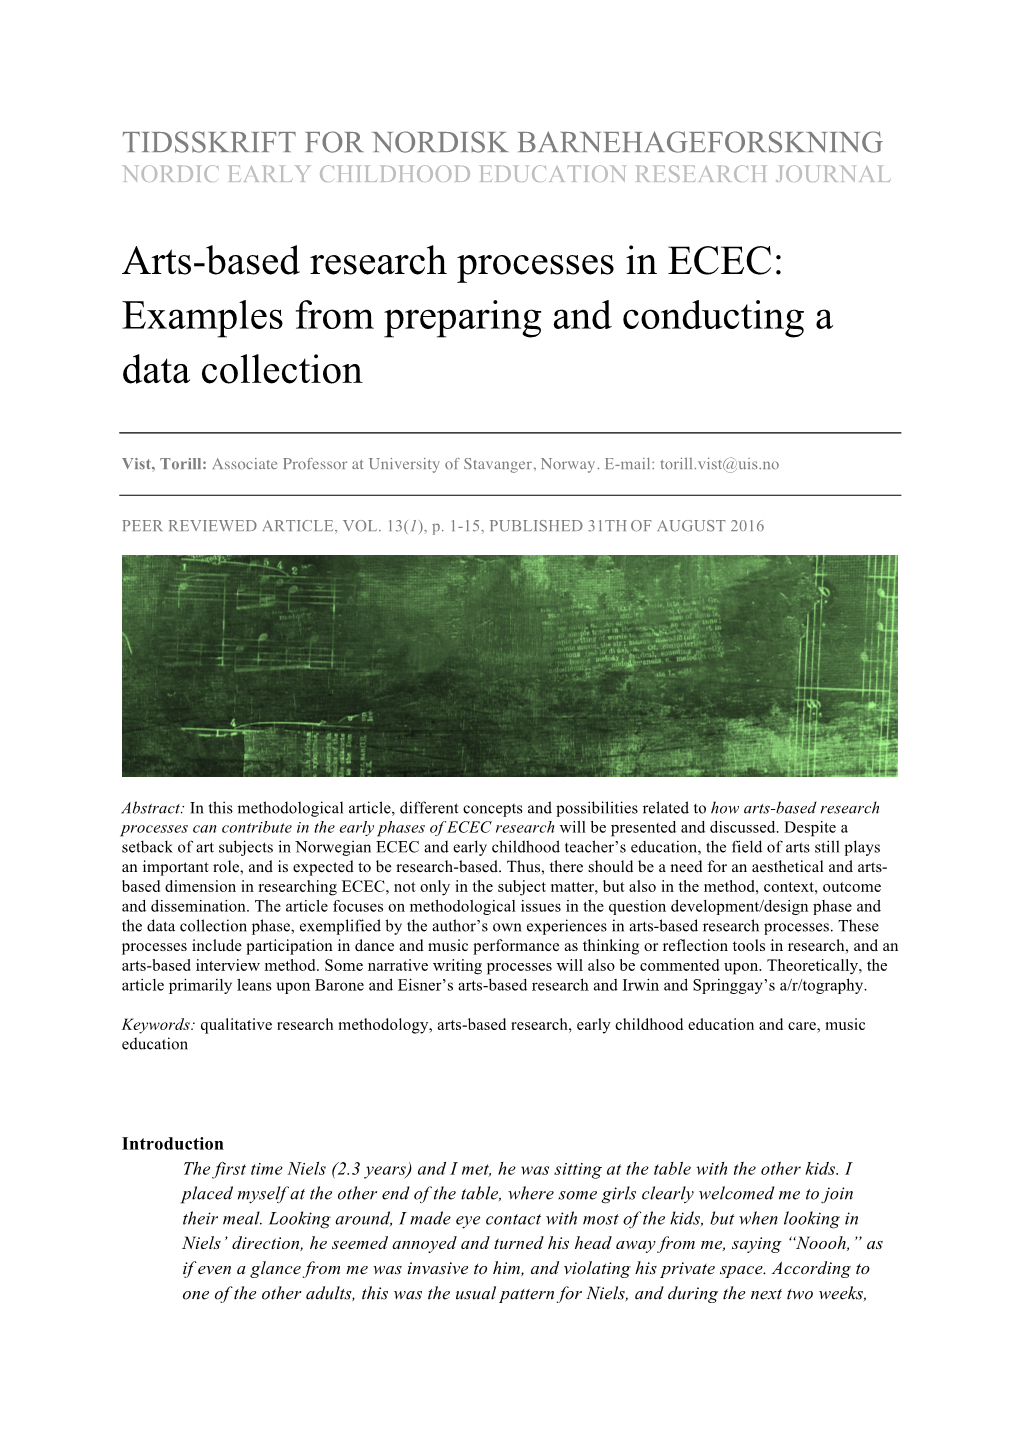 Arts-Based Research Processes in ECEC: Examples from Preparing and Conducting a Data Collection